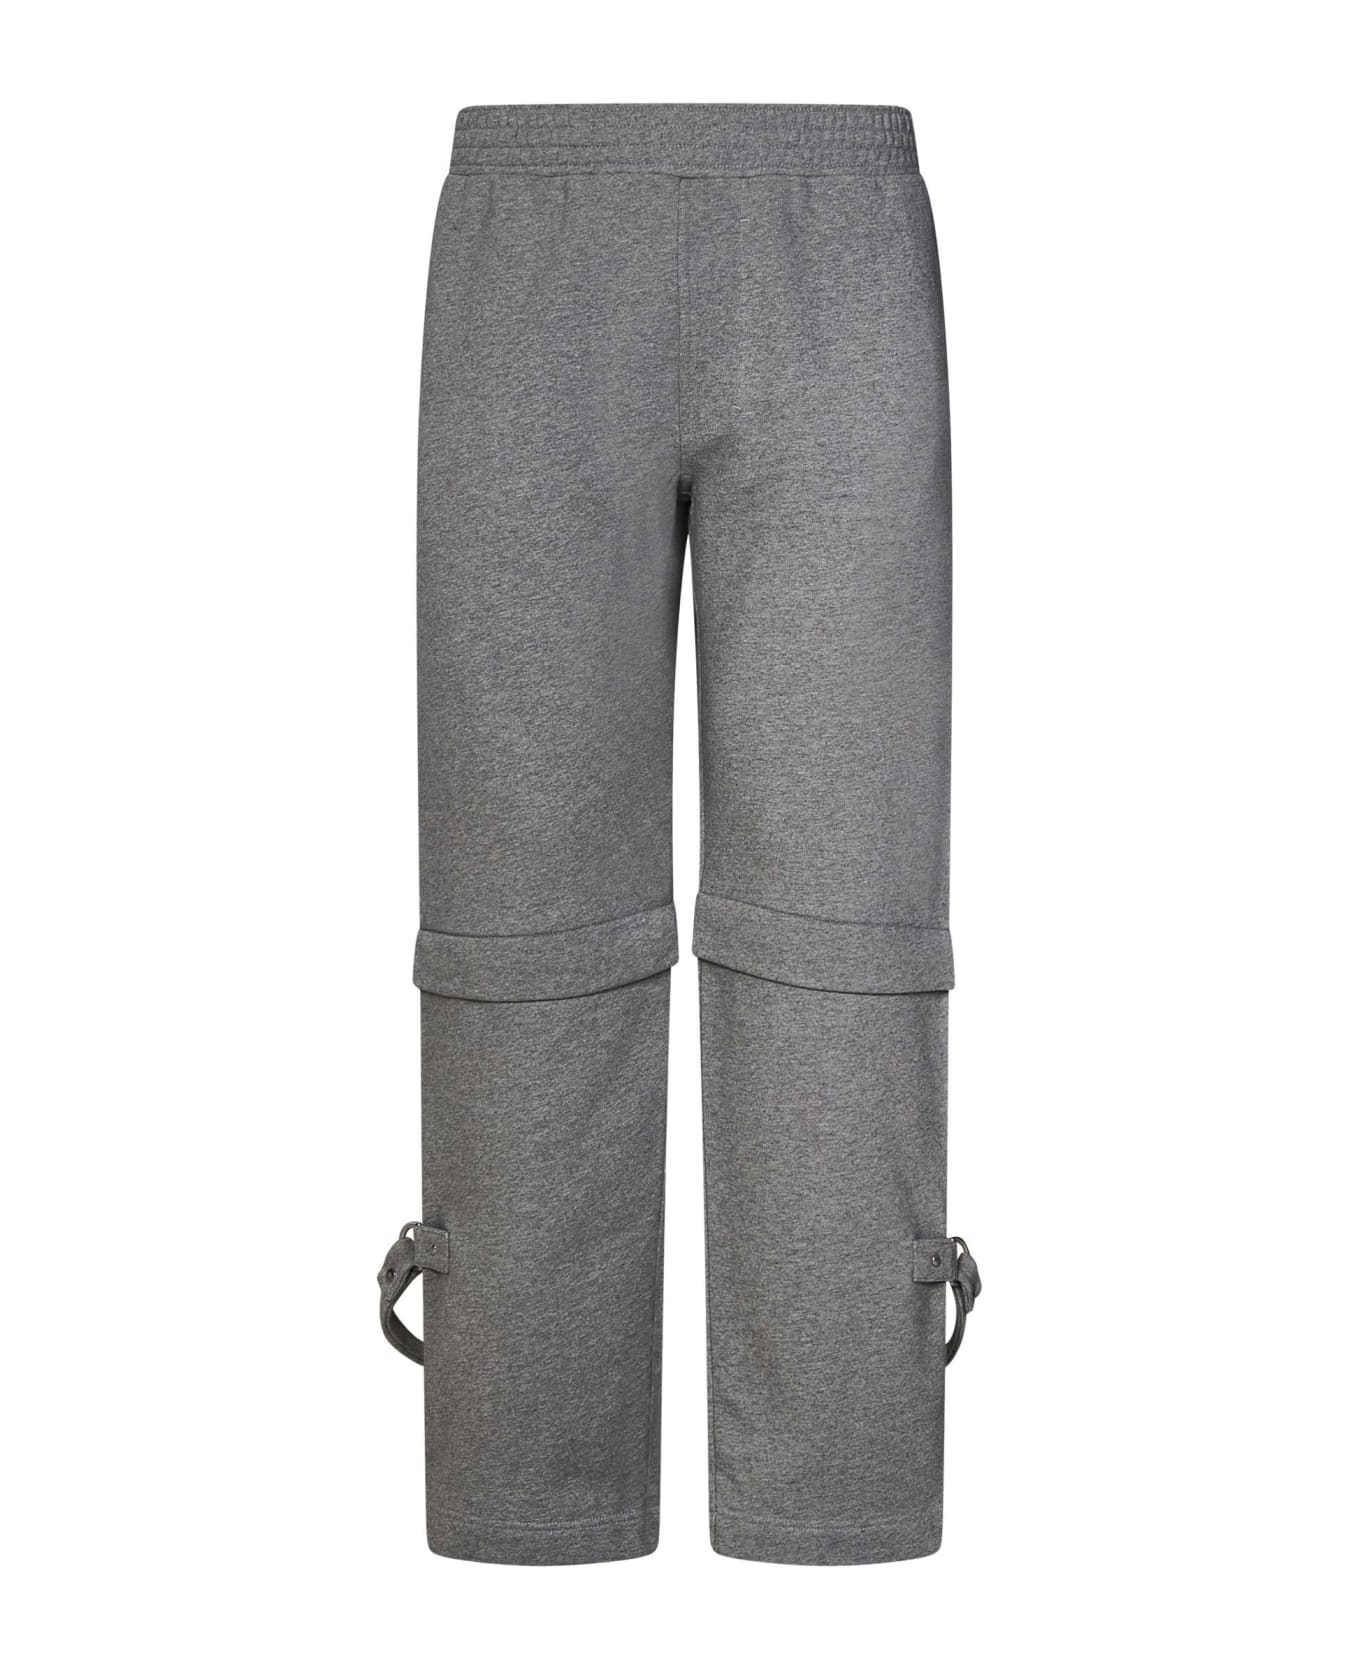 Givenchy Trousers - Grey ボトムス